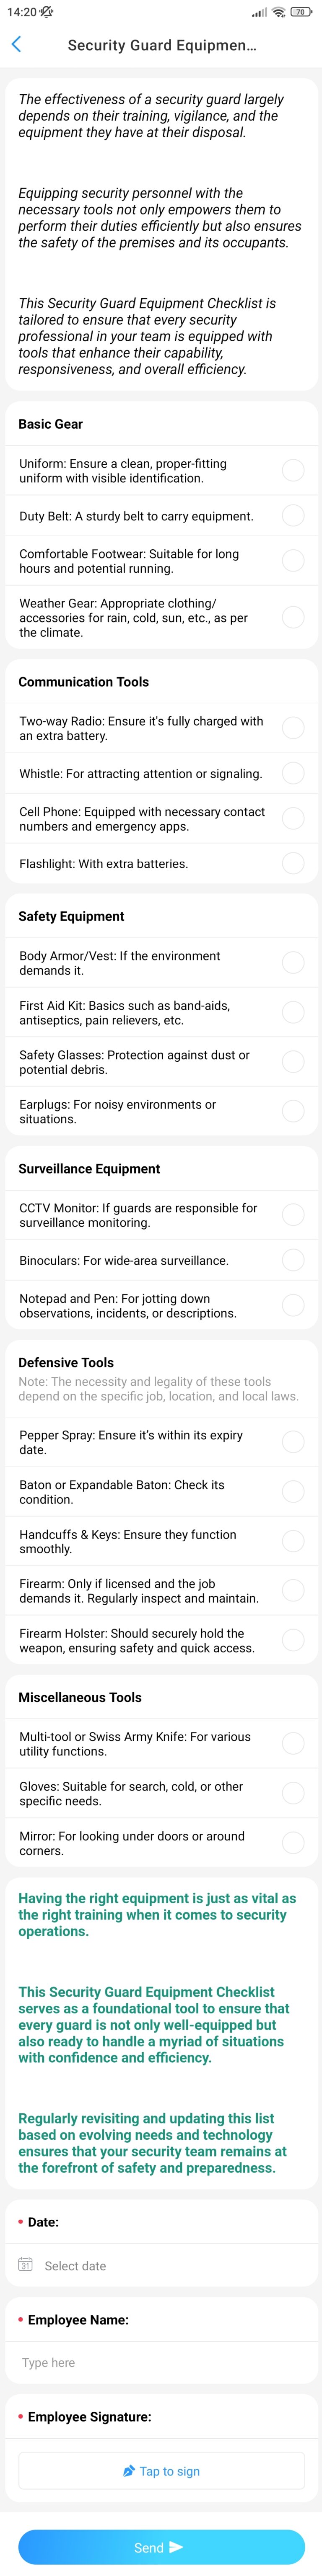 Security Guard Equipment Checklist Template